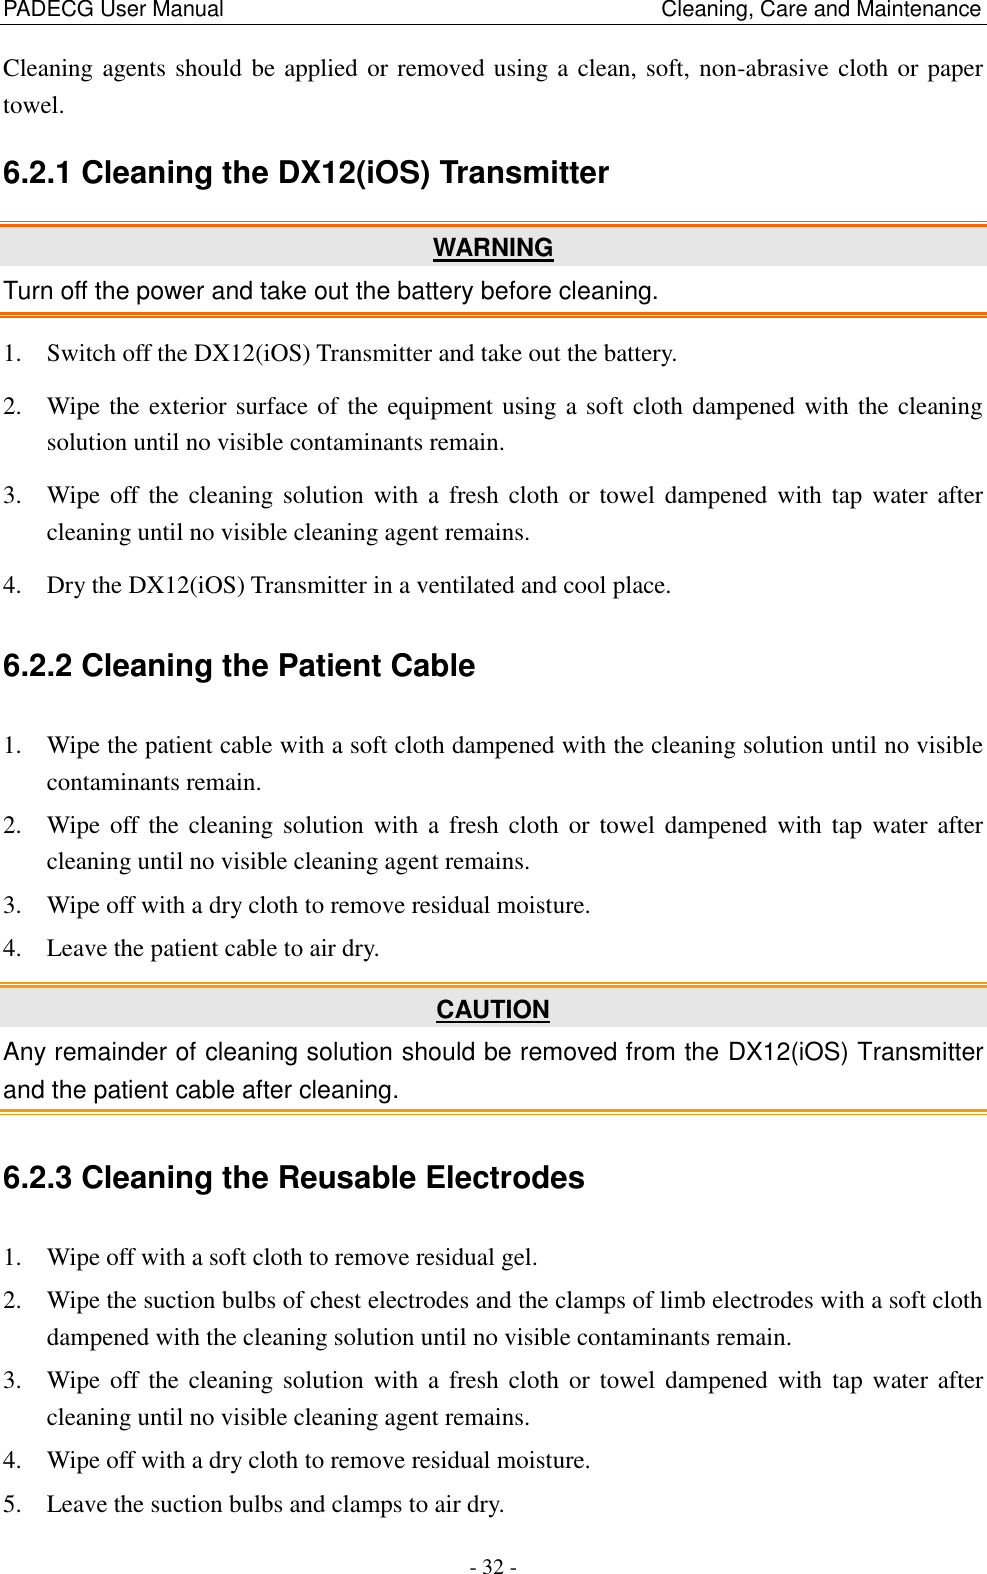 PADECG User Manual                                                                                Cleaning, Care and Maintenance - 32 - Cleaning agents should be applied or removed using a clean, soft, non-abrasive cloth or paper towel. 6.2.1 Cleaning the DX12(iOS) Transmitter WARNING Turn off the power and take out the battery before cleaning. 1. Switch off the DX12(iOS) Transmitter and take out the battery. 2. Wipe the exterior surface of the equipment using a soft cloth dampened with the cleaning solution until no visible contaminants remain. 3. Wipe off the  cleaning solution  with  a  fresh cloth  or  towel  dampened  with  tap water after cleaning until no visible cleaning agent remains. 4. Dry the DX12(iOS) Transmitter in a ventilated and cool place. 6.2.2 Cleaning the Patient Cable 1. Wipe the patient cable with a soft cloth dampened with the cleaning solution until no visible contaminants remain. 2. Wipe off the  cleaning solution  with  a  fresh cloth  or  towel  dampened  with  tap water after cleaning until no visible cleaning agent remains. 3. Wipe off with a dry cloth to remove residual moisture. 4. Leave the patient cable to air dry. CAUTION Any remainder of cleaning solution should be removed from the DX12(iOS) Transmitter and the patient cable after cleaning. 6.2.3 Cleaning the Reusable Electrodes 1. Wipe off with a soft cloth to remove residual gel. 2. Wipe the suction bulbs of chest electrodes and the clamps of limb electrodes with a soft cloth dampened with the cleaning solution until no visible contaminants remain. 3. Wipe off the  cleaning solution  with  a  fresh cloth  or towel  dampened with  tap  water  after cleaning until no visible cleaning agent remains. 4. Wipe off with a dry cloth to remove residual moisture. 5. Leave the suction bulbs and clamps to air dry. 